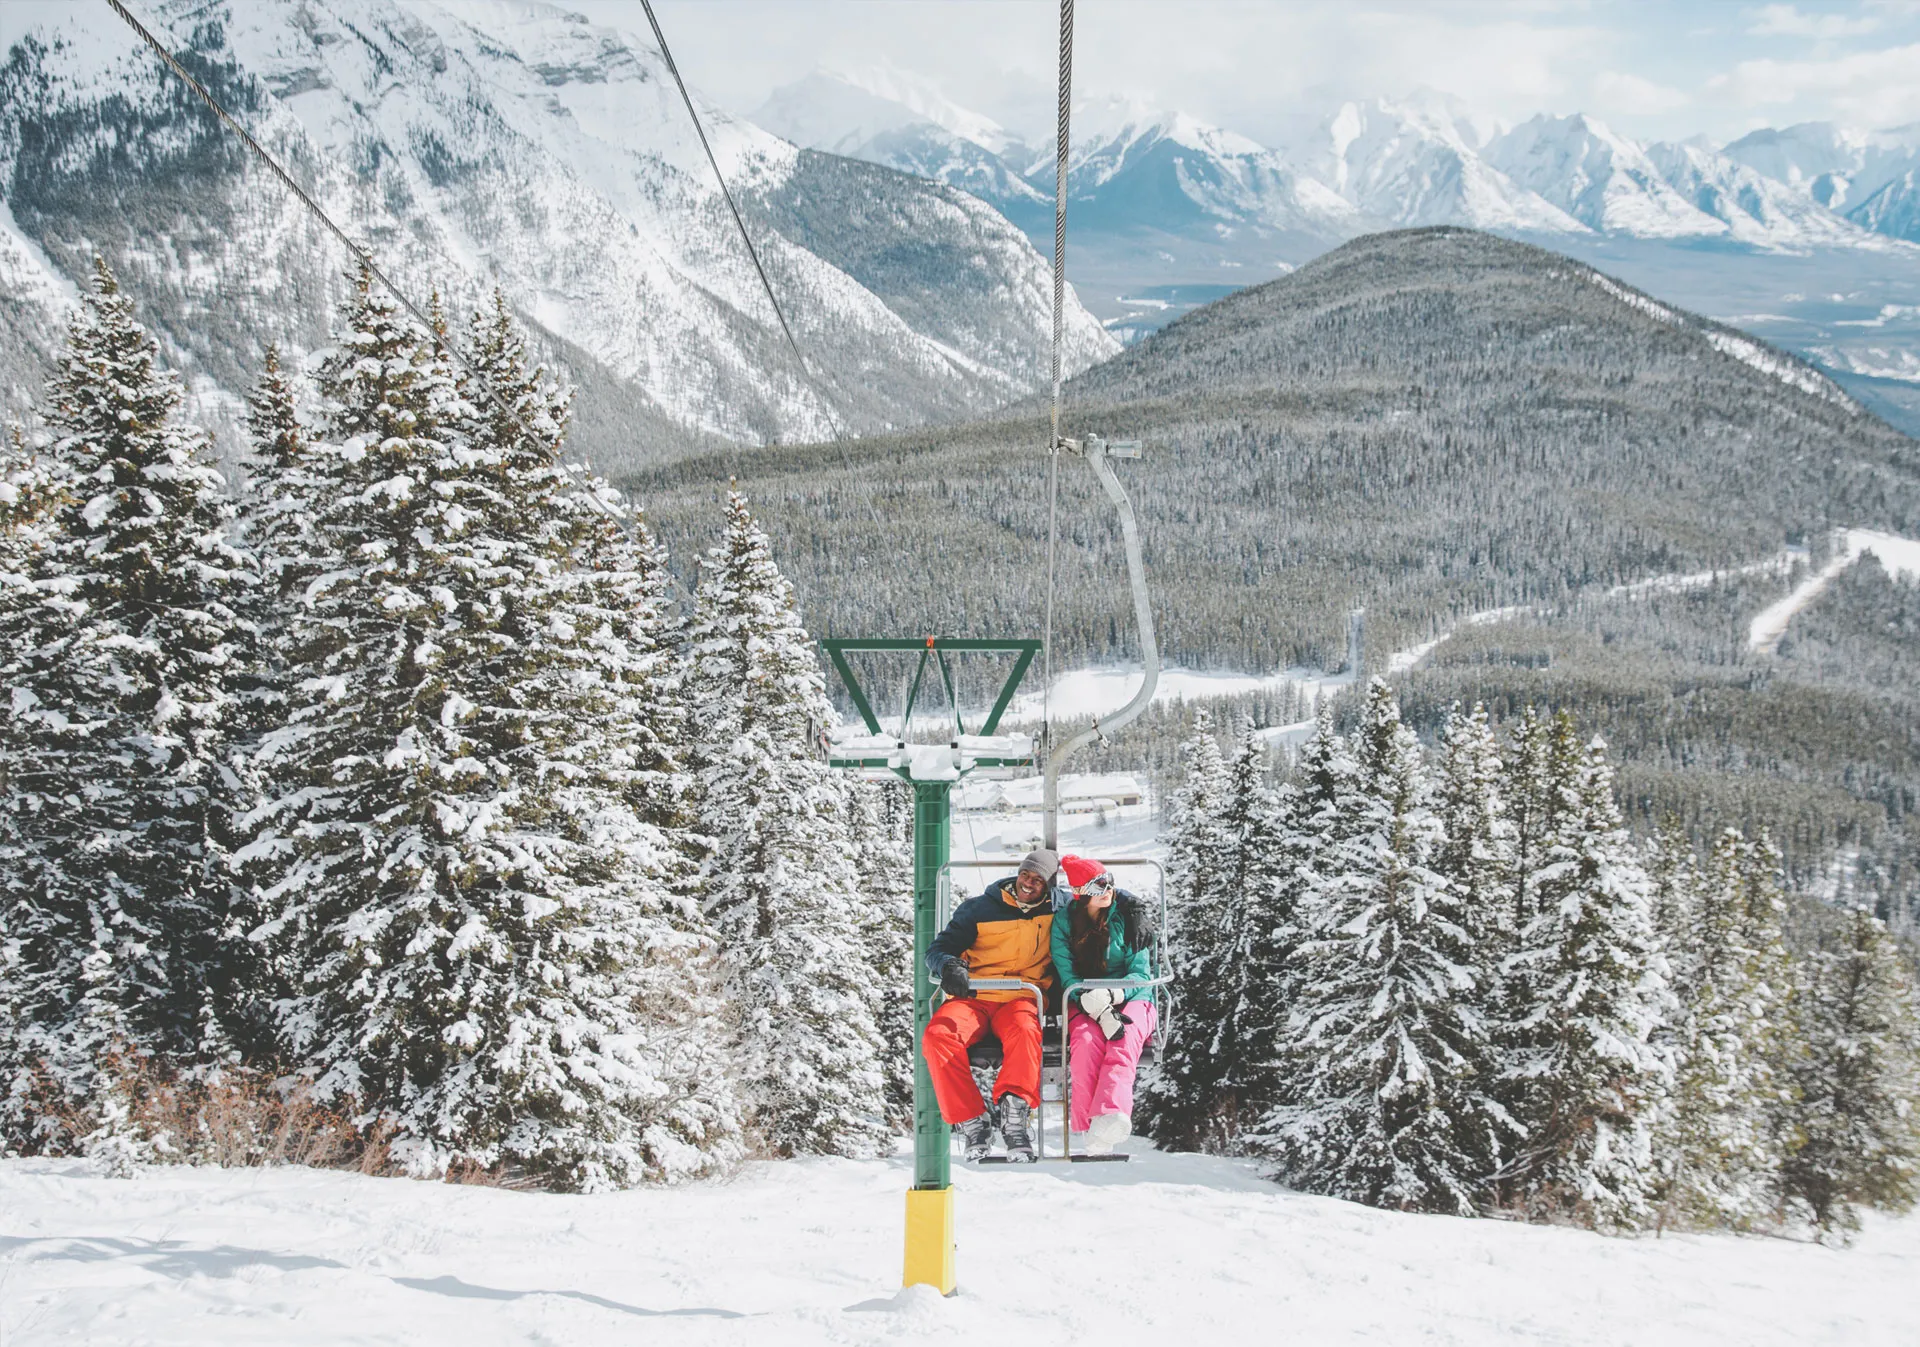 Riding the chairlift at Mount Norquay Ski Resort (Photo credit: Travel Alberta/Mike Seehagel).